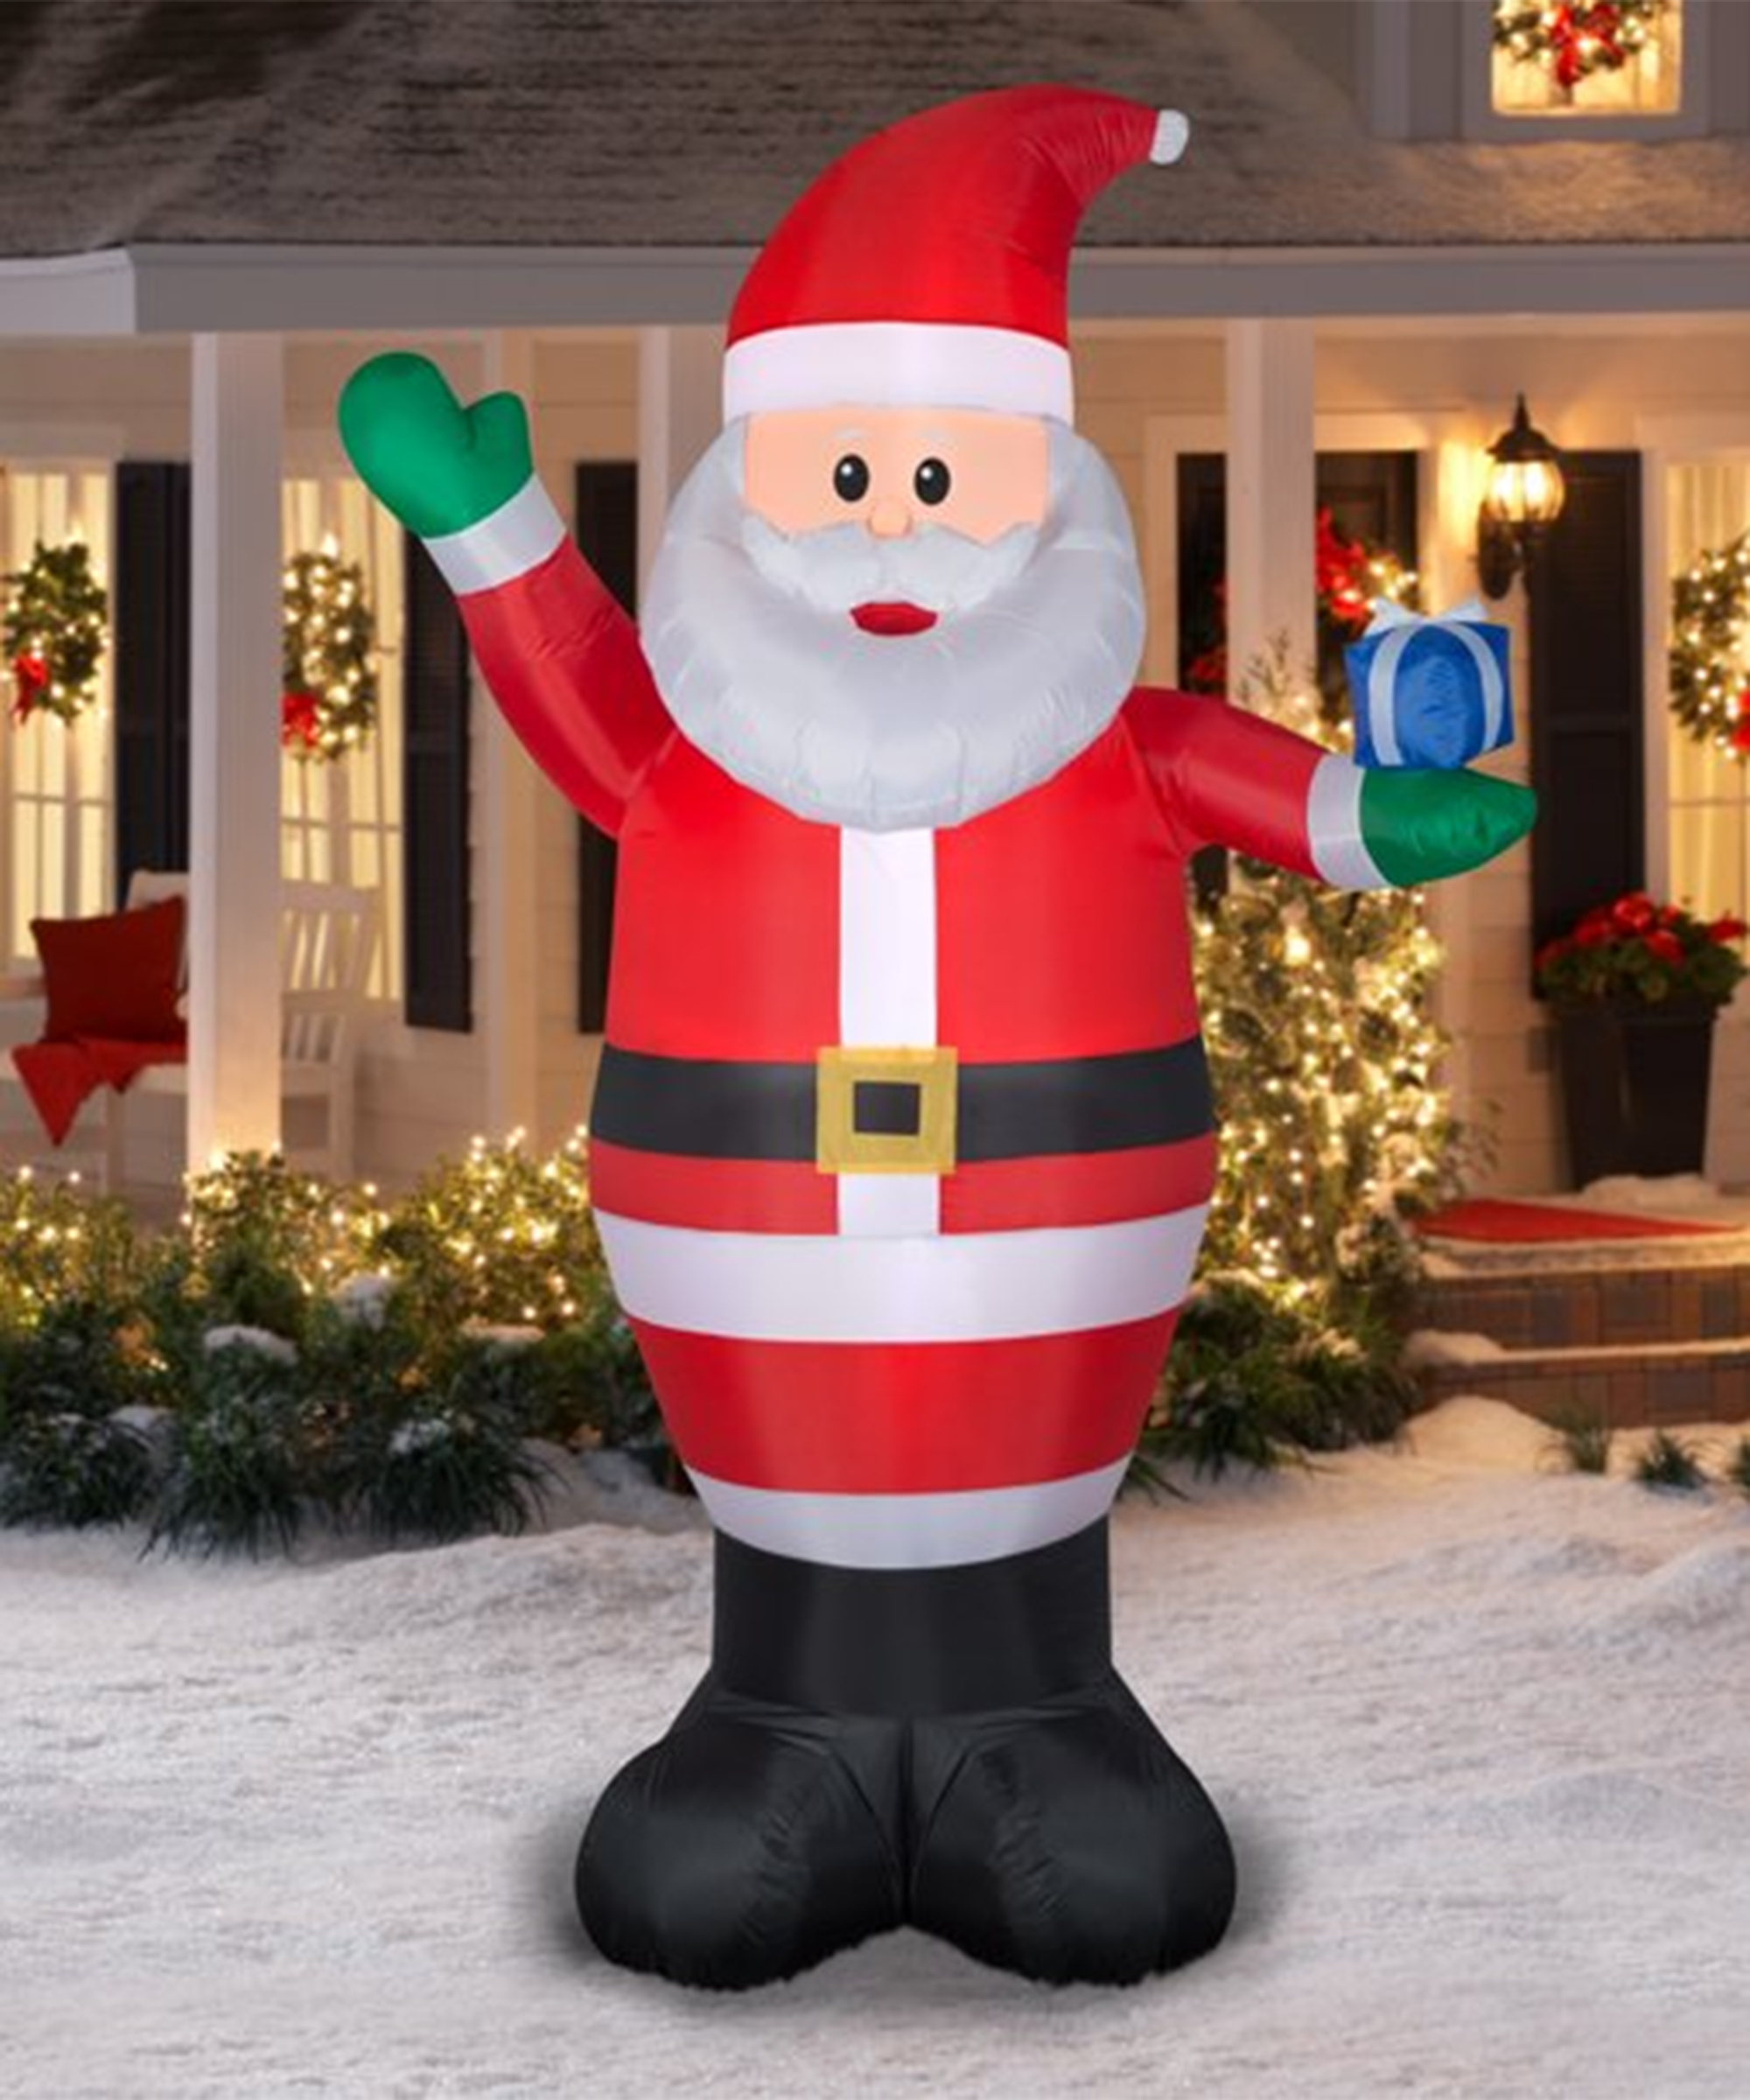 9ft airblown inflatable Santa stood outside of home which has outdoor bushes lit with fairy lights